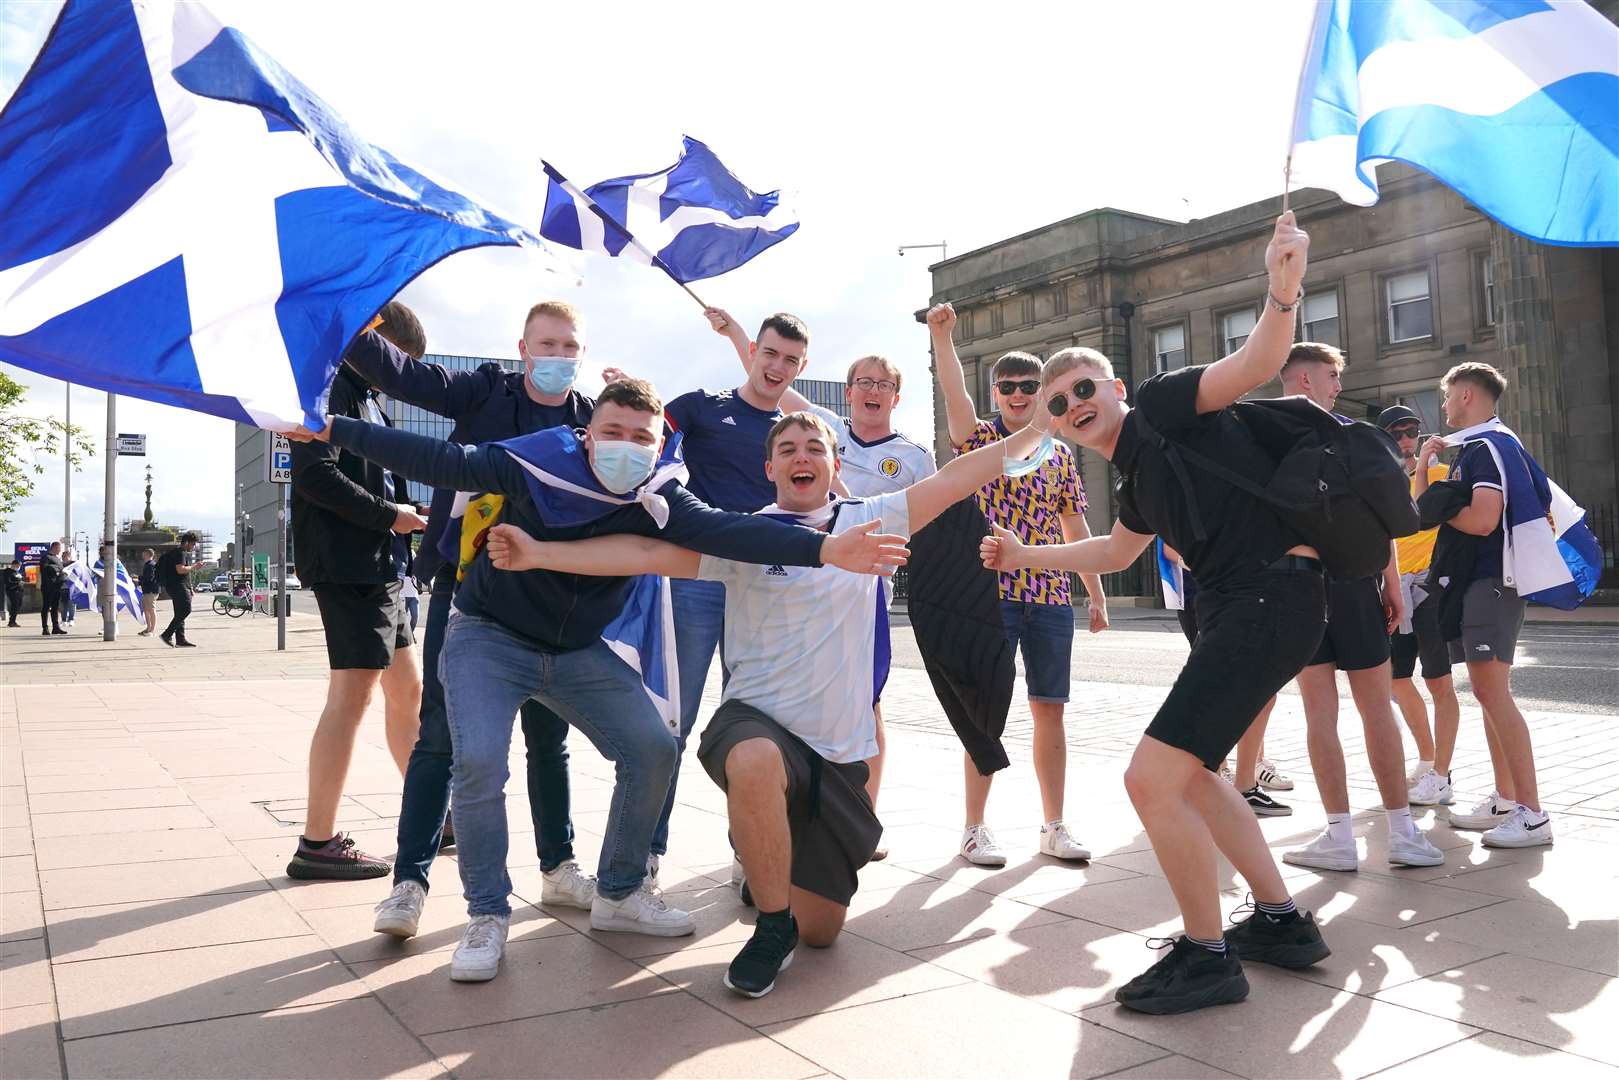 The sun came out for these Scotland supporters at the fans zone in Glasgow (Jane Barlow/PA)